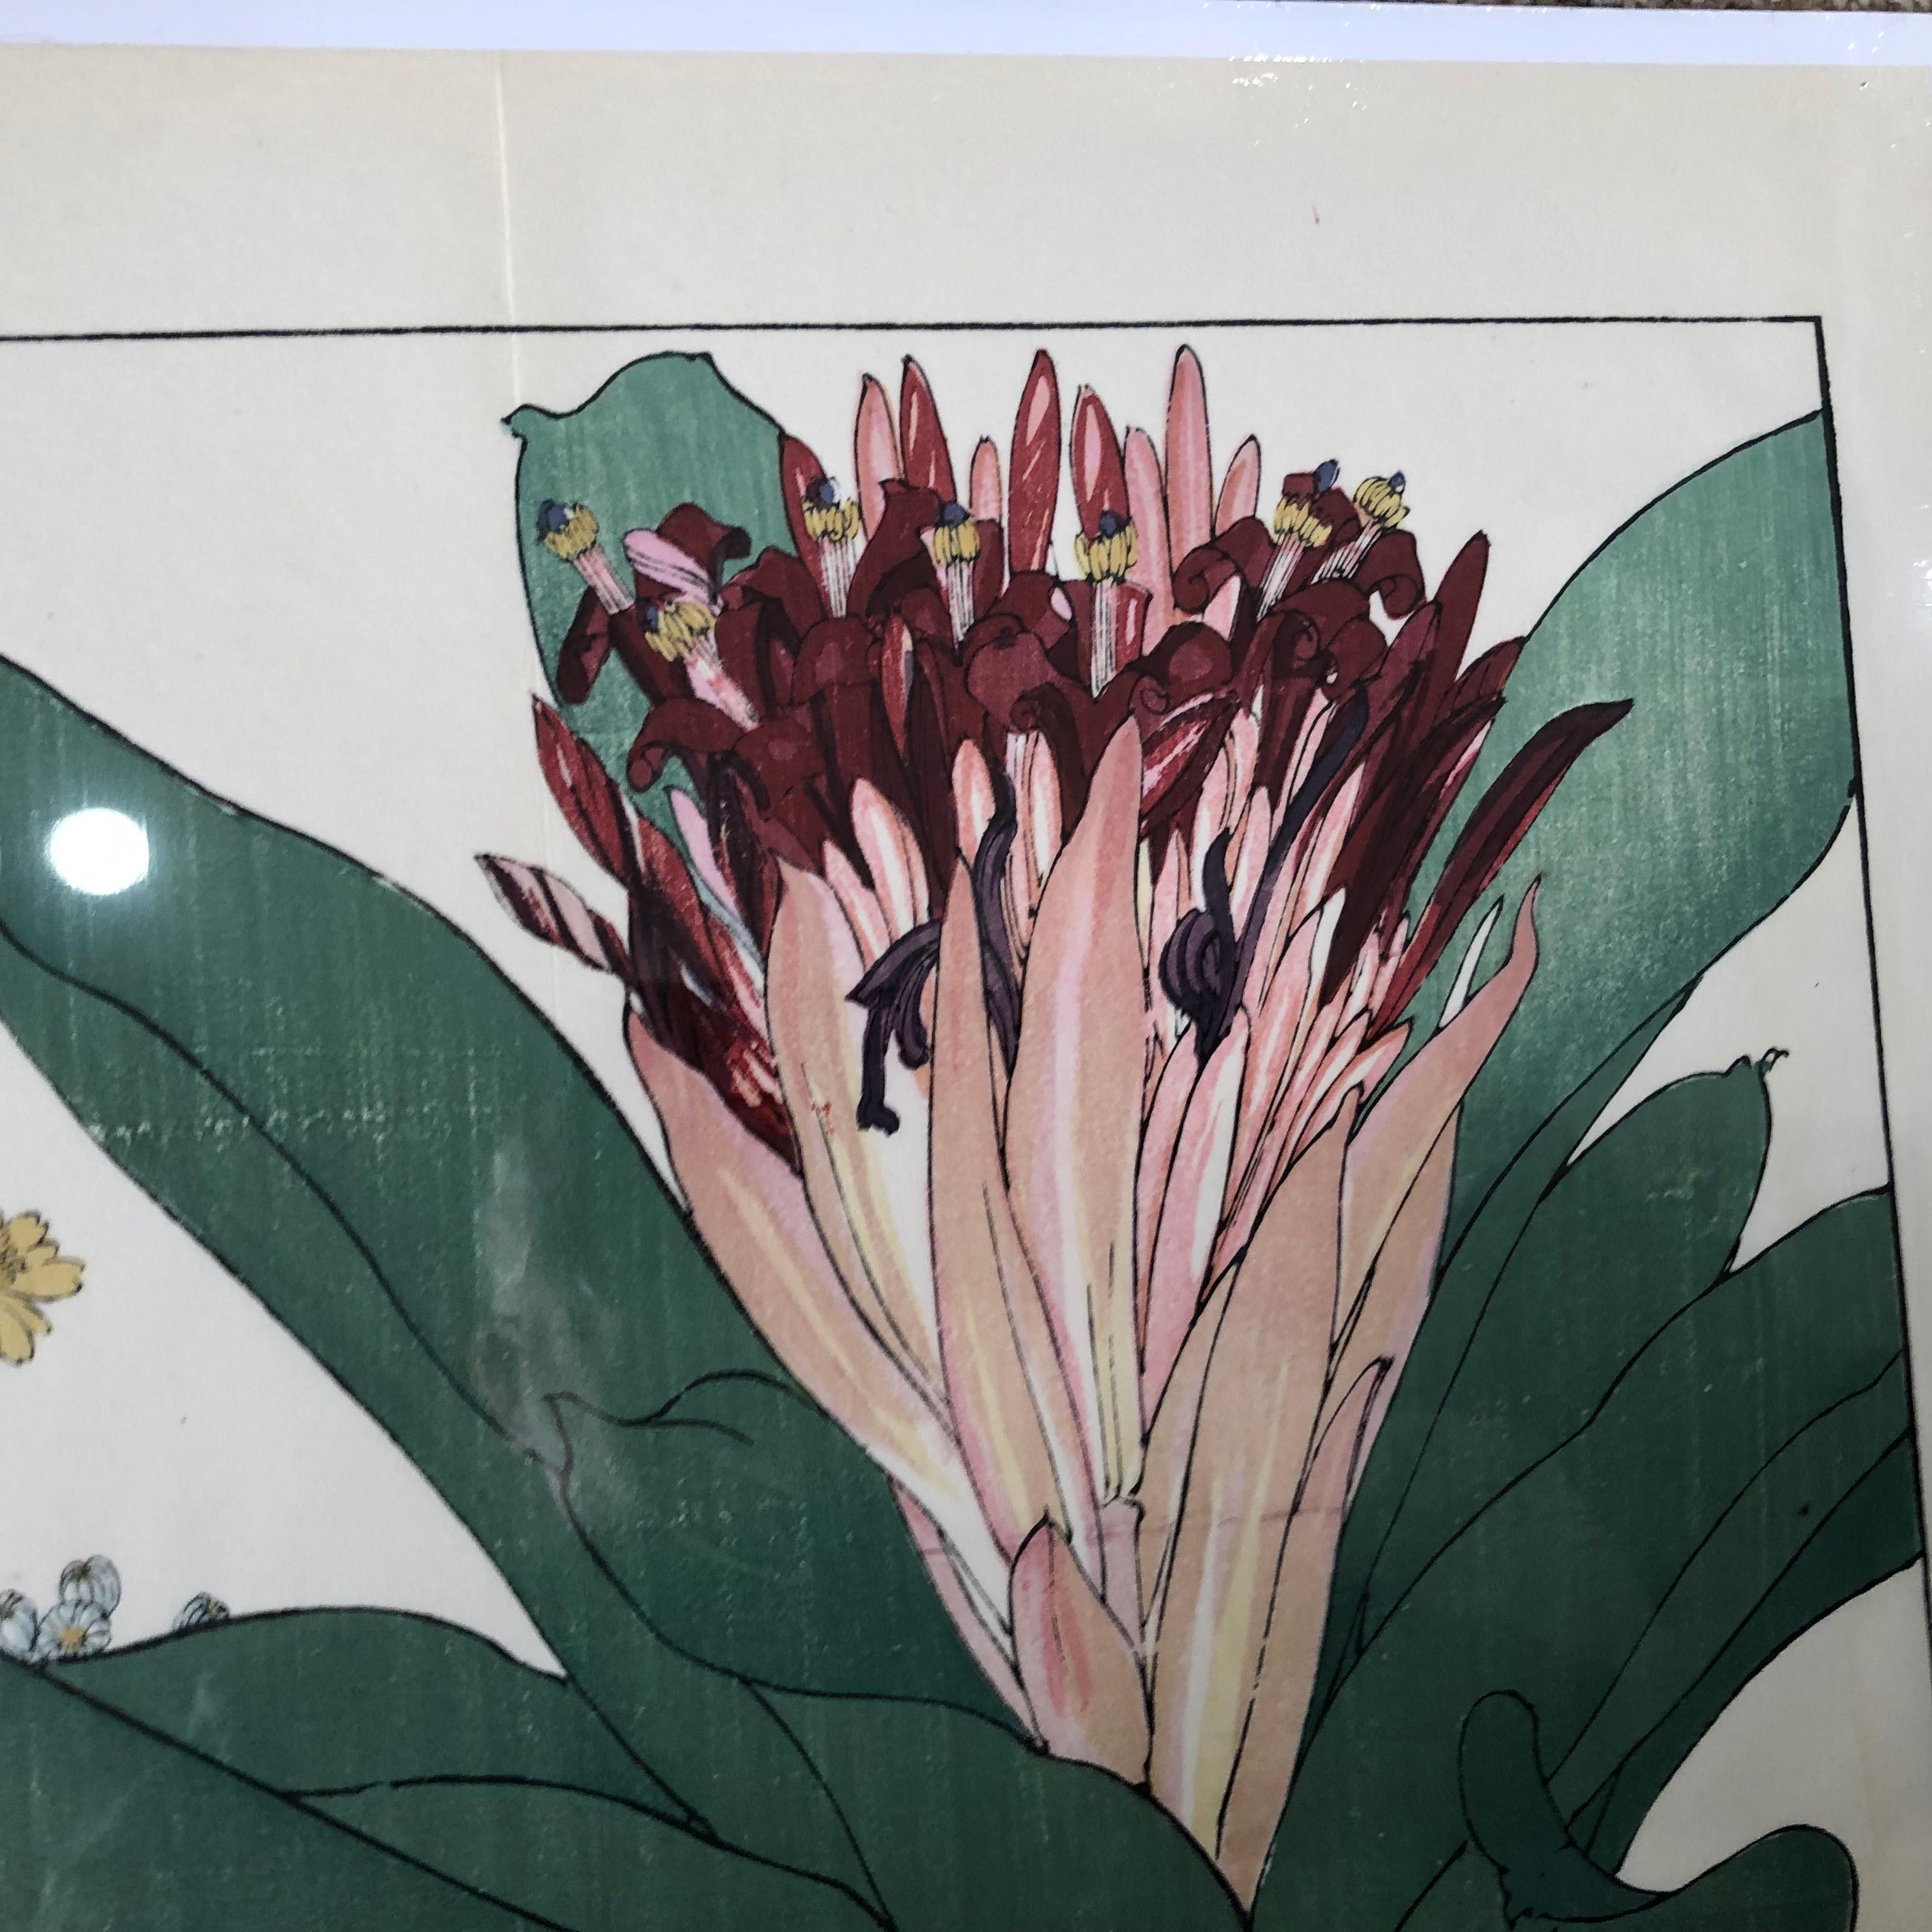 Japanese Eight Old Woodblock Flower Prints, Superb Colors, Immed Frameable #2 6